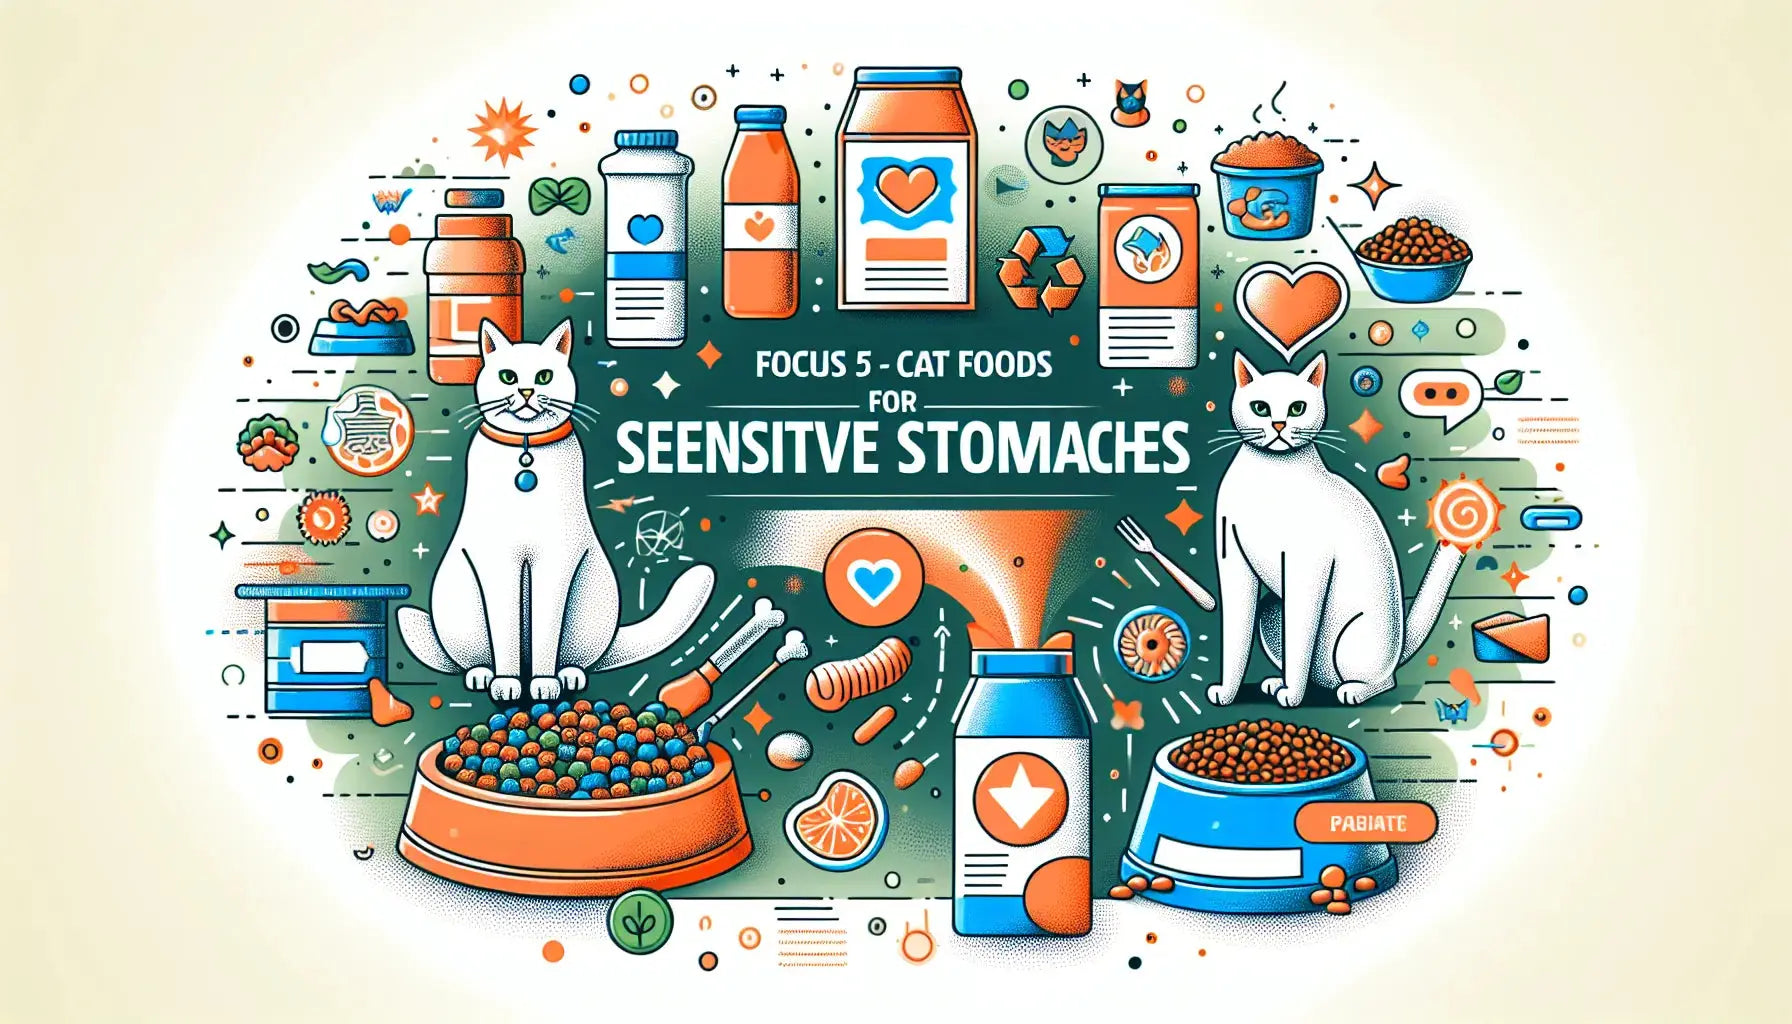 Top 5 Cat Foods for Sensitive Stomachs